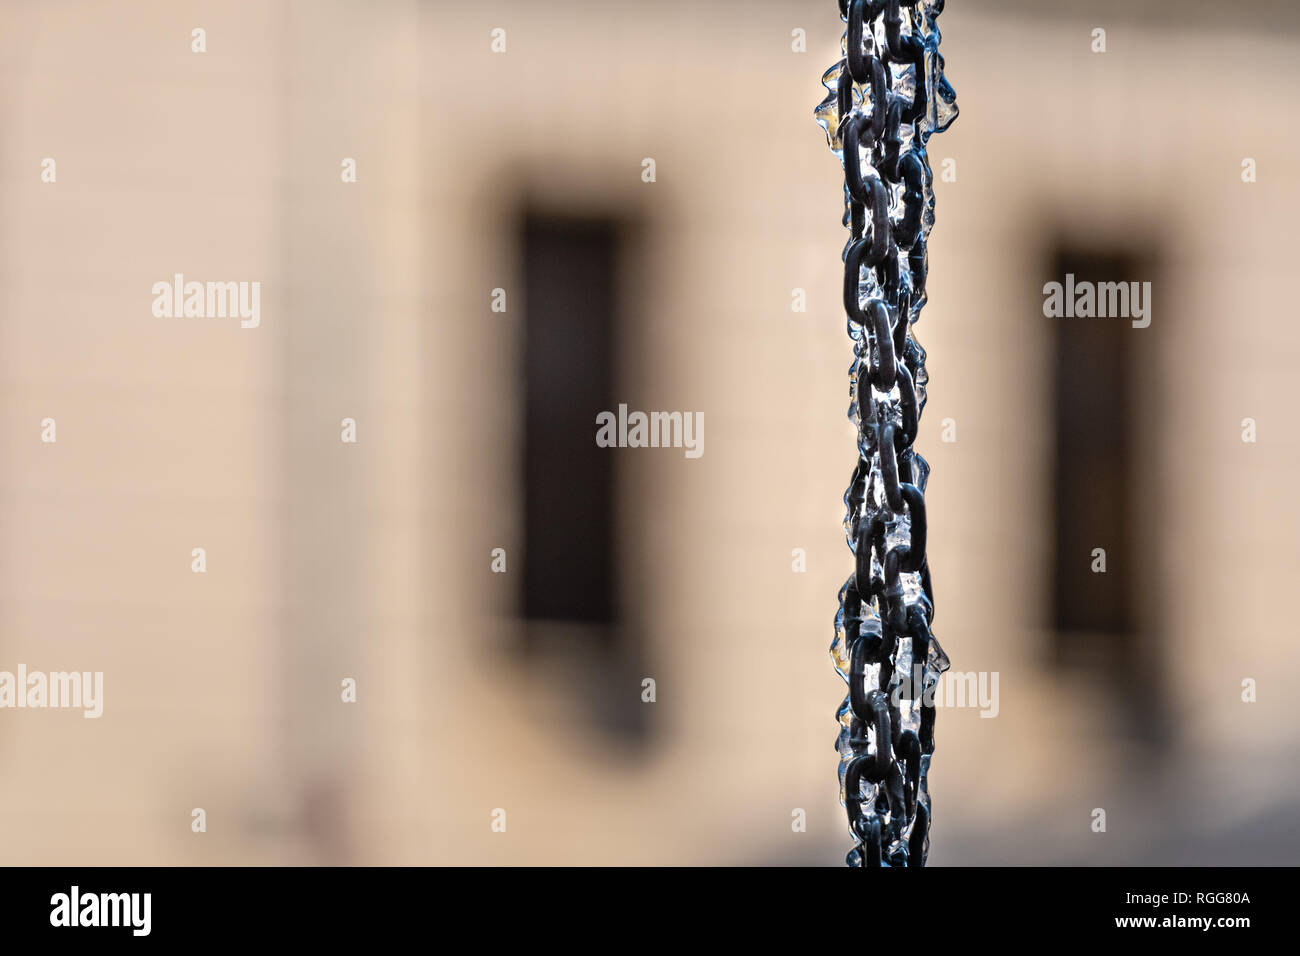 Icy vertical chain on blurred street background. Stock Photo